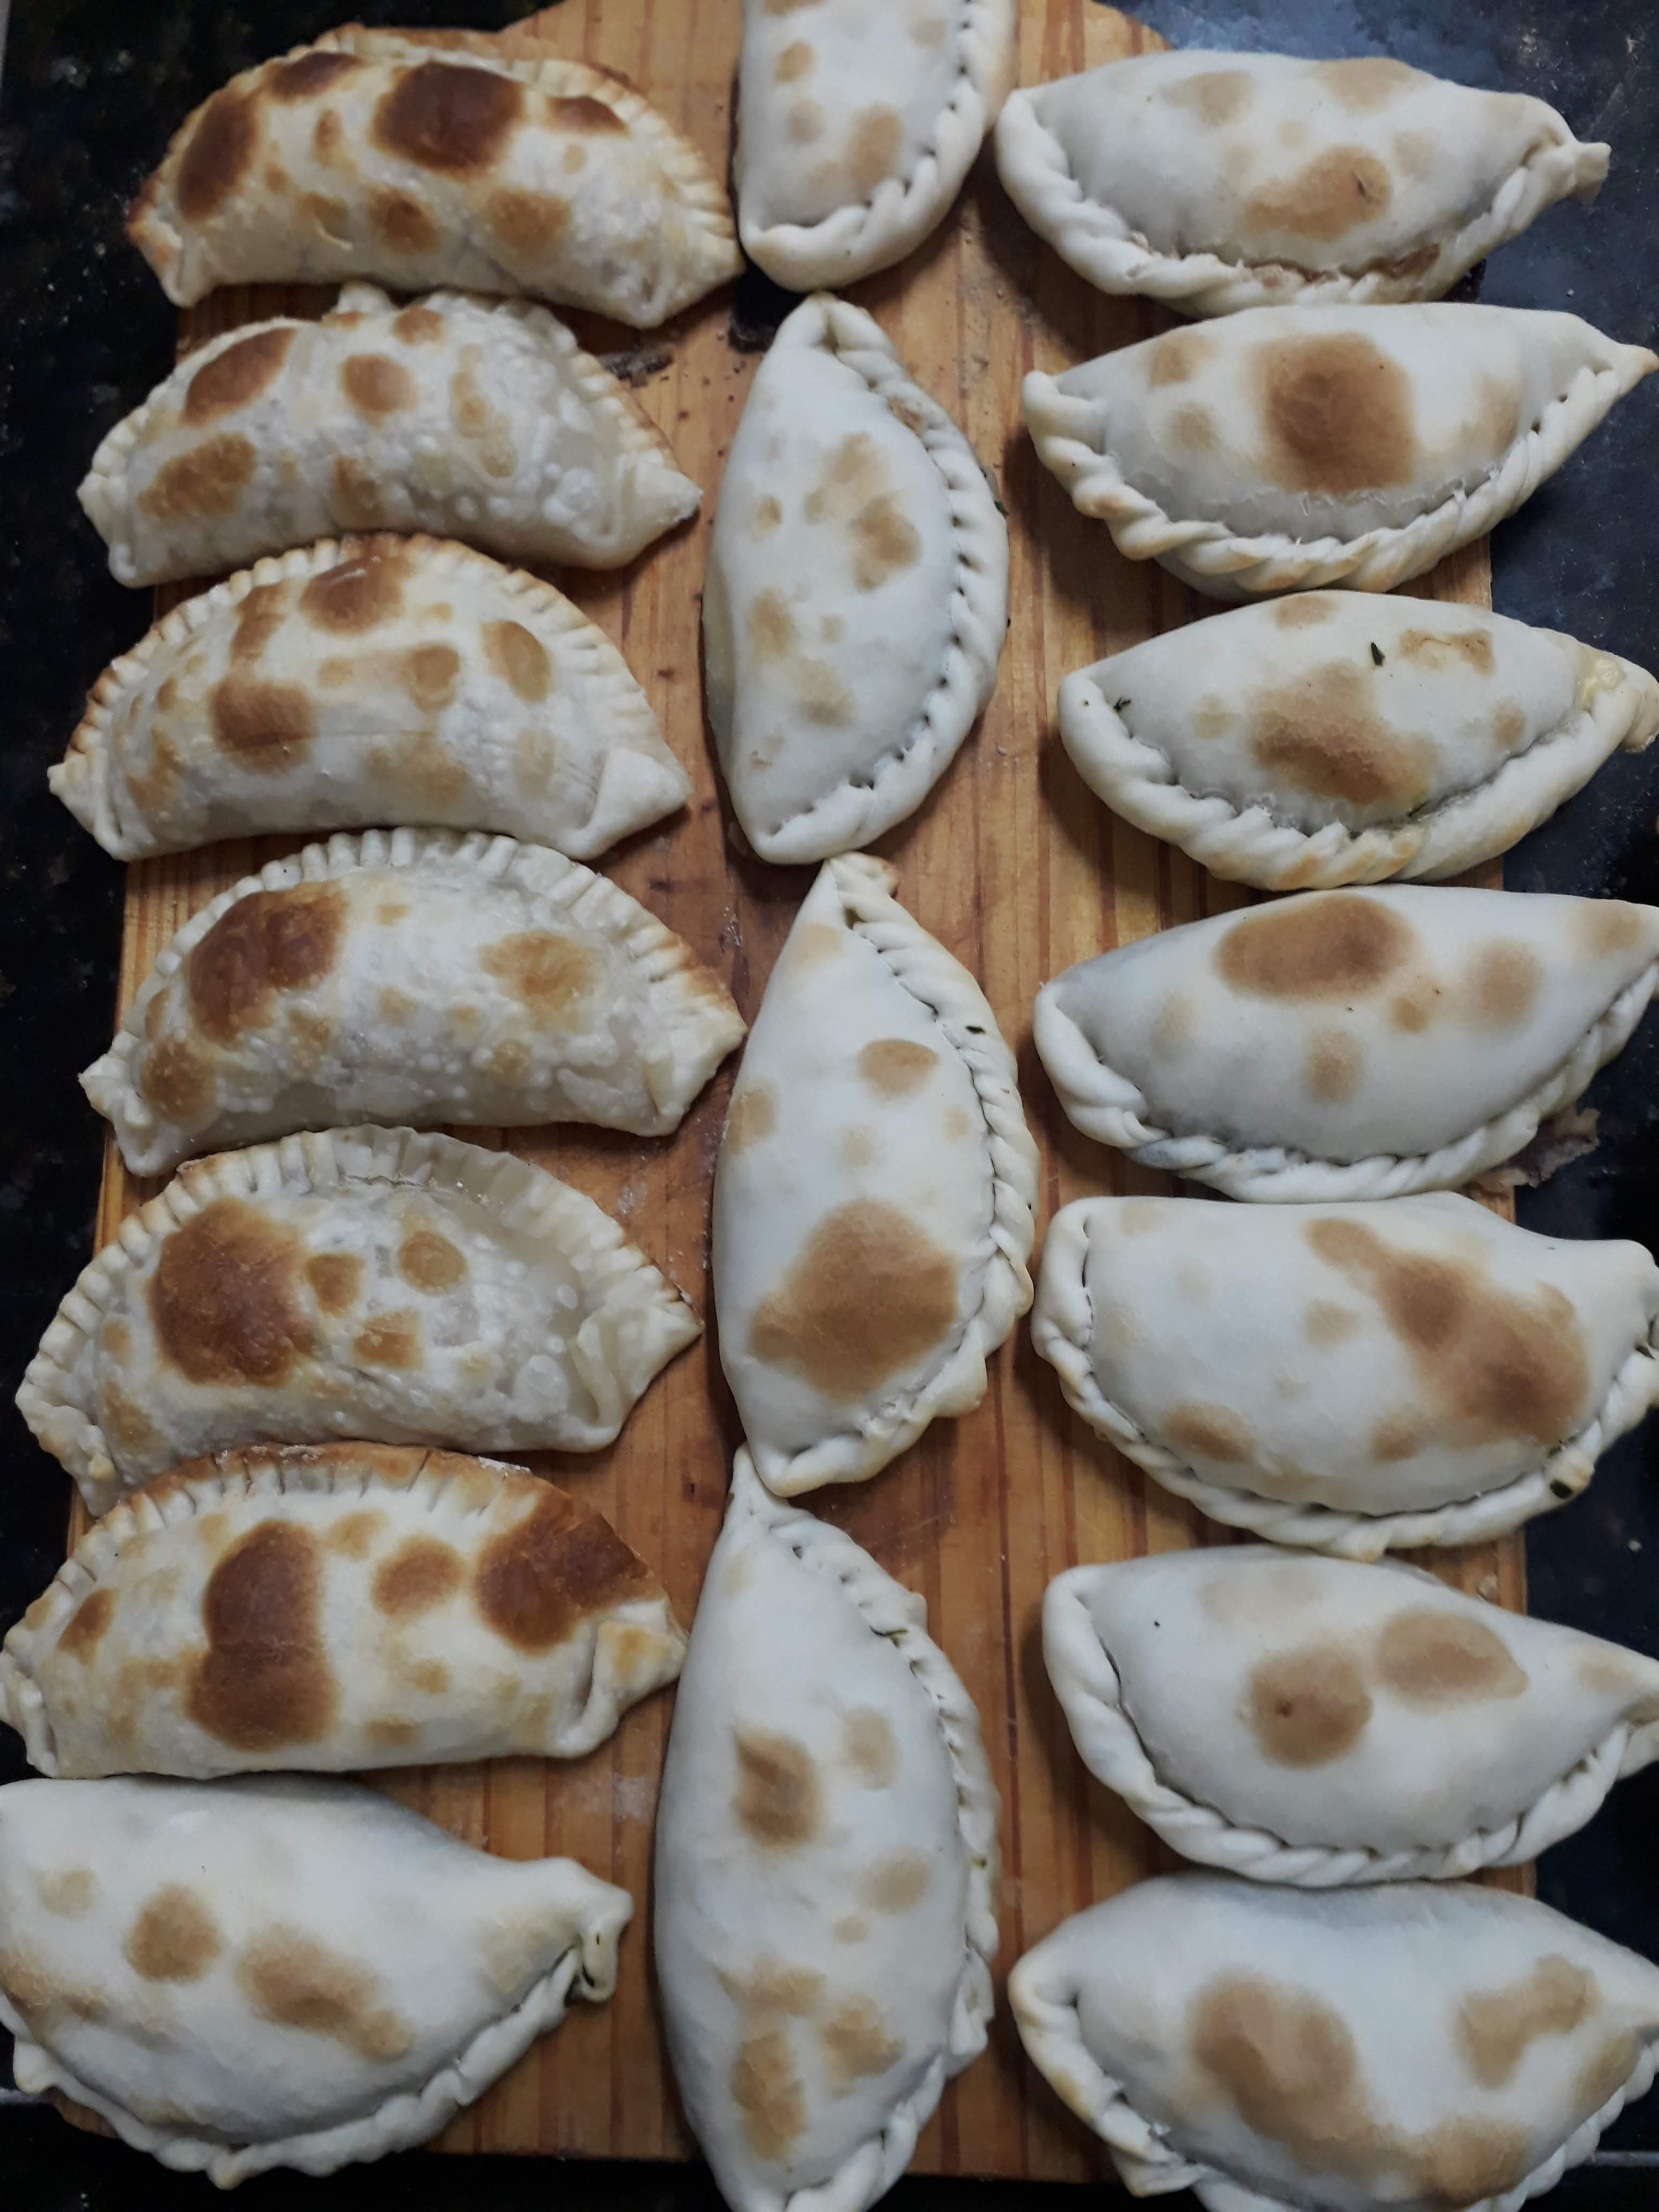 lots of cooked empanadas arranged neatly on a wooden cutting board